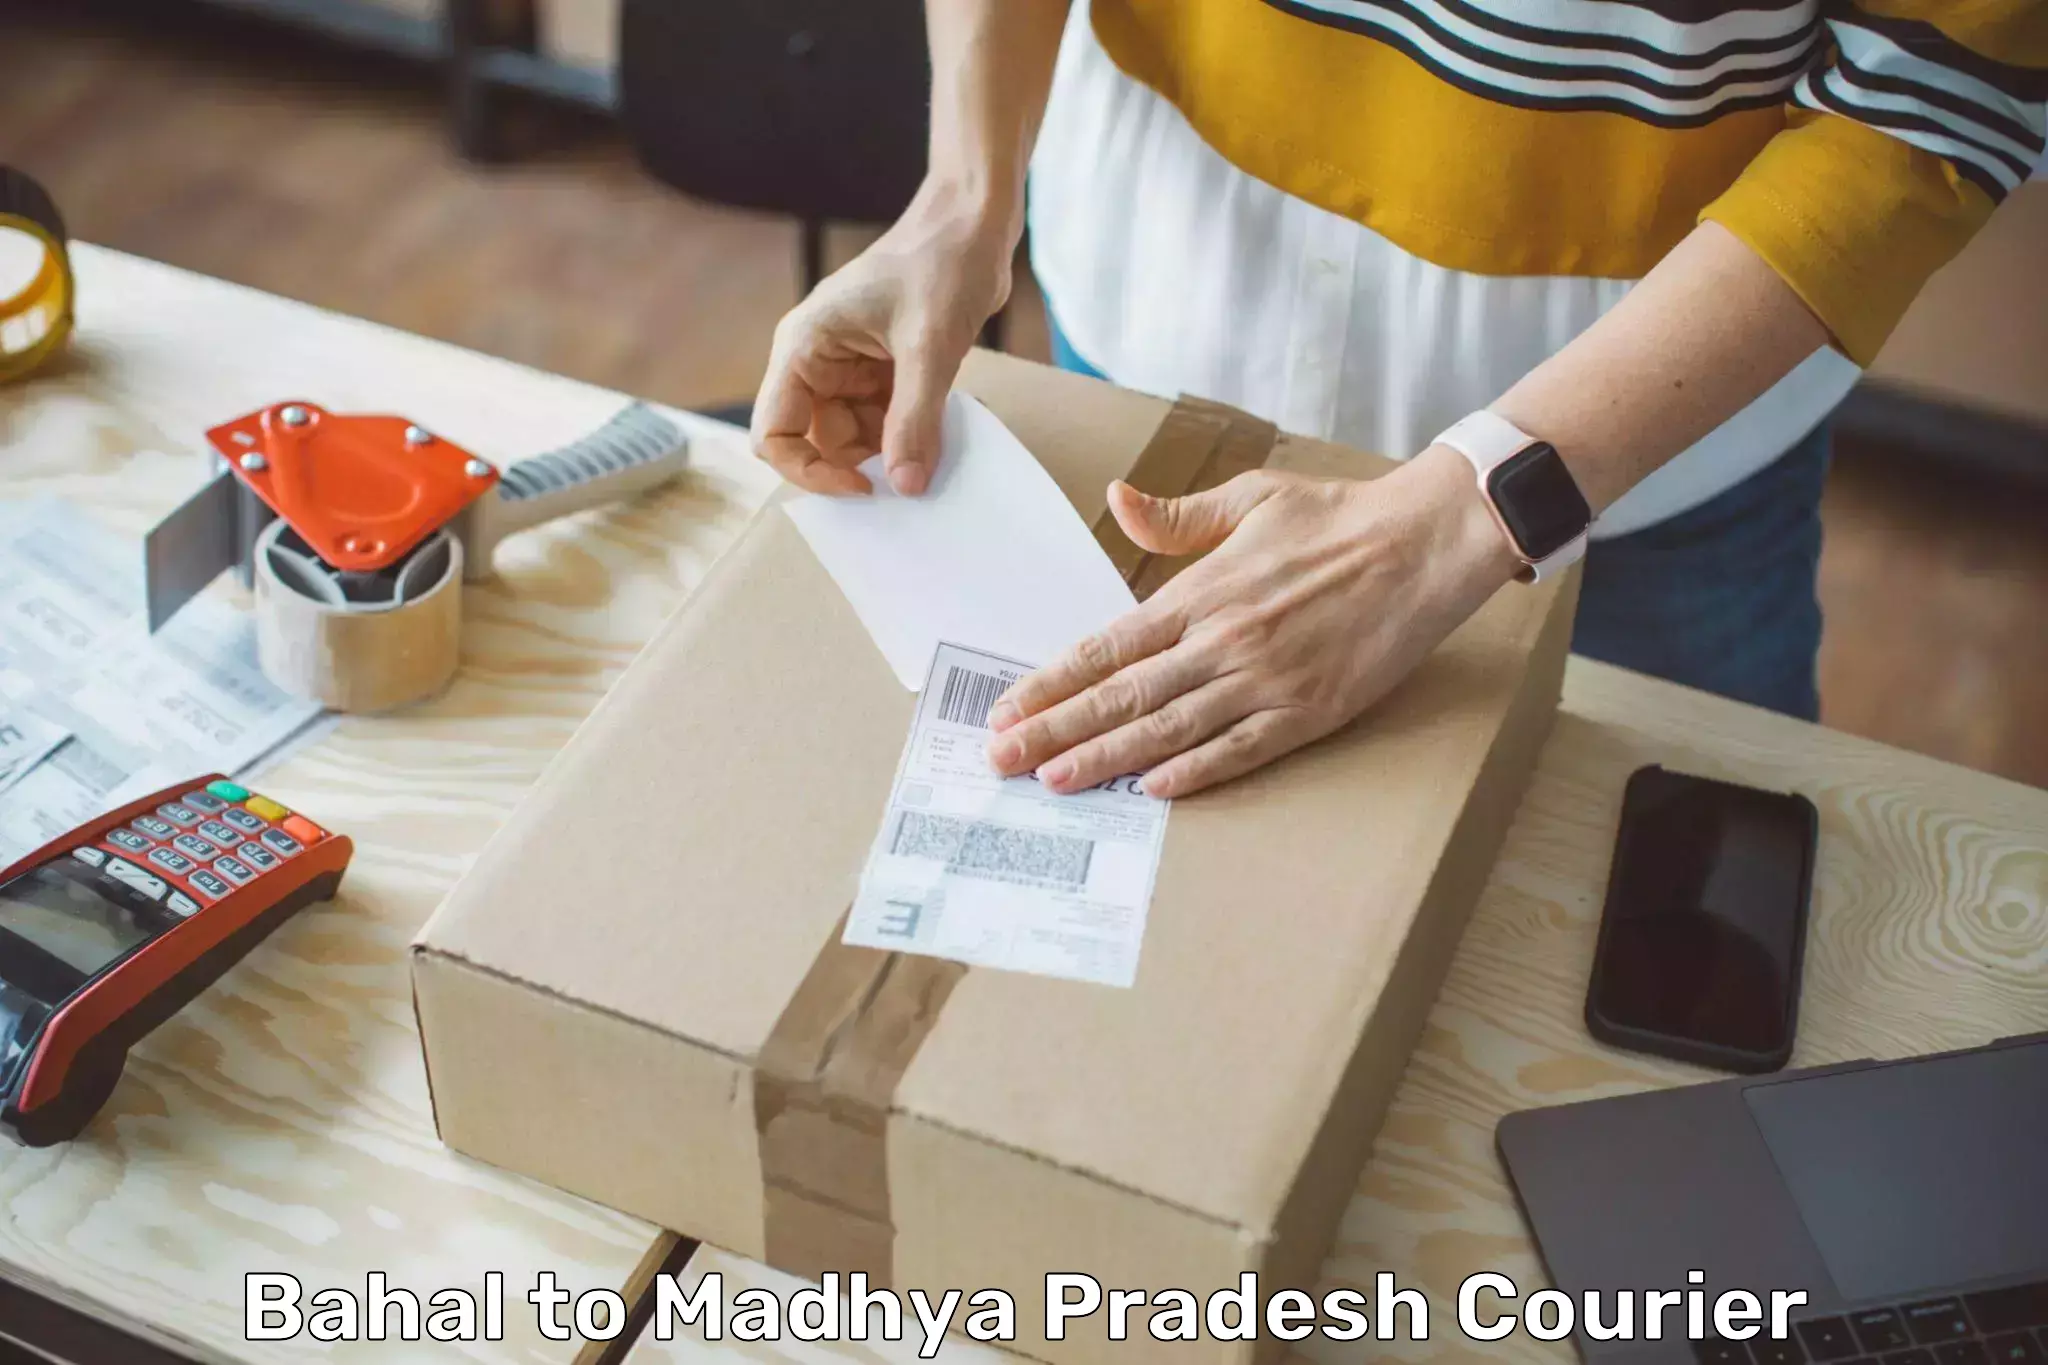 24-hour courier service Bahal to Madhya Pradesh